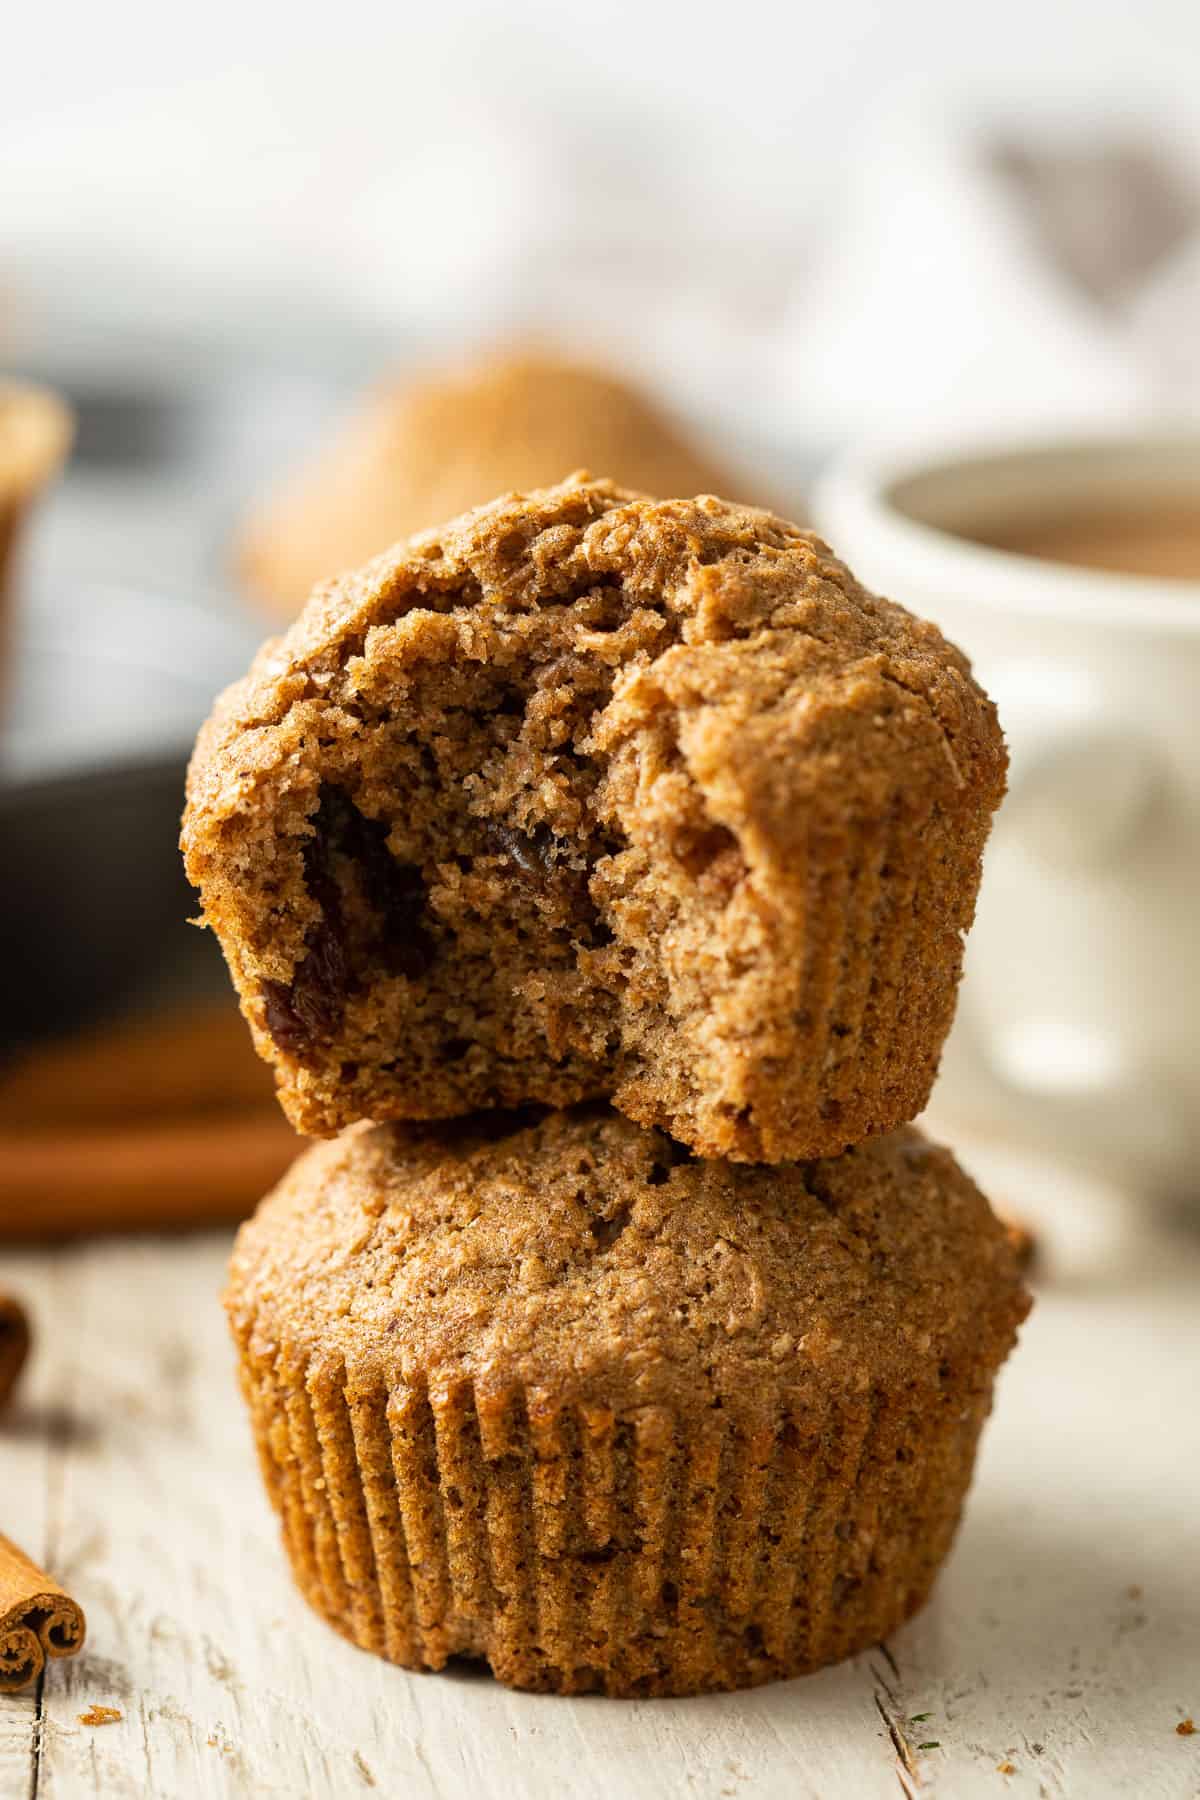 One vegan bran muffin stacked on another with a missing from the top one.